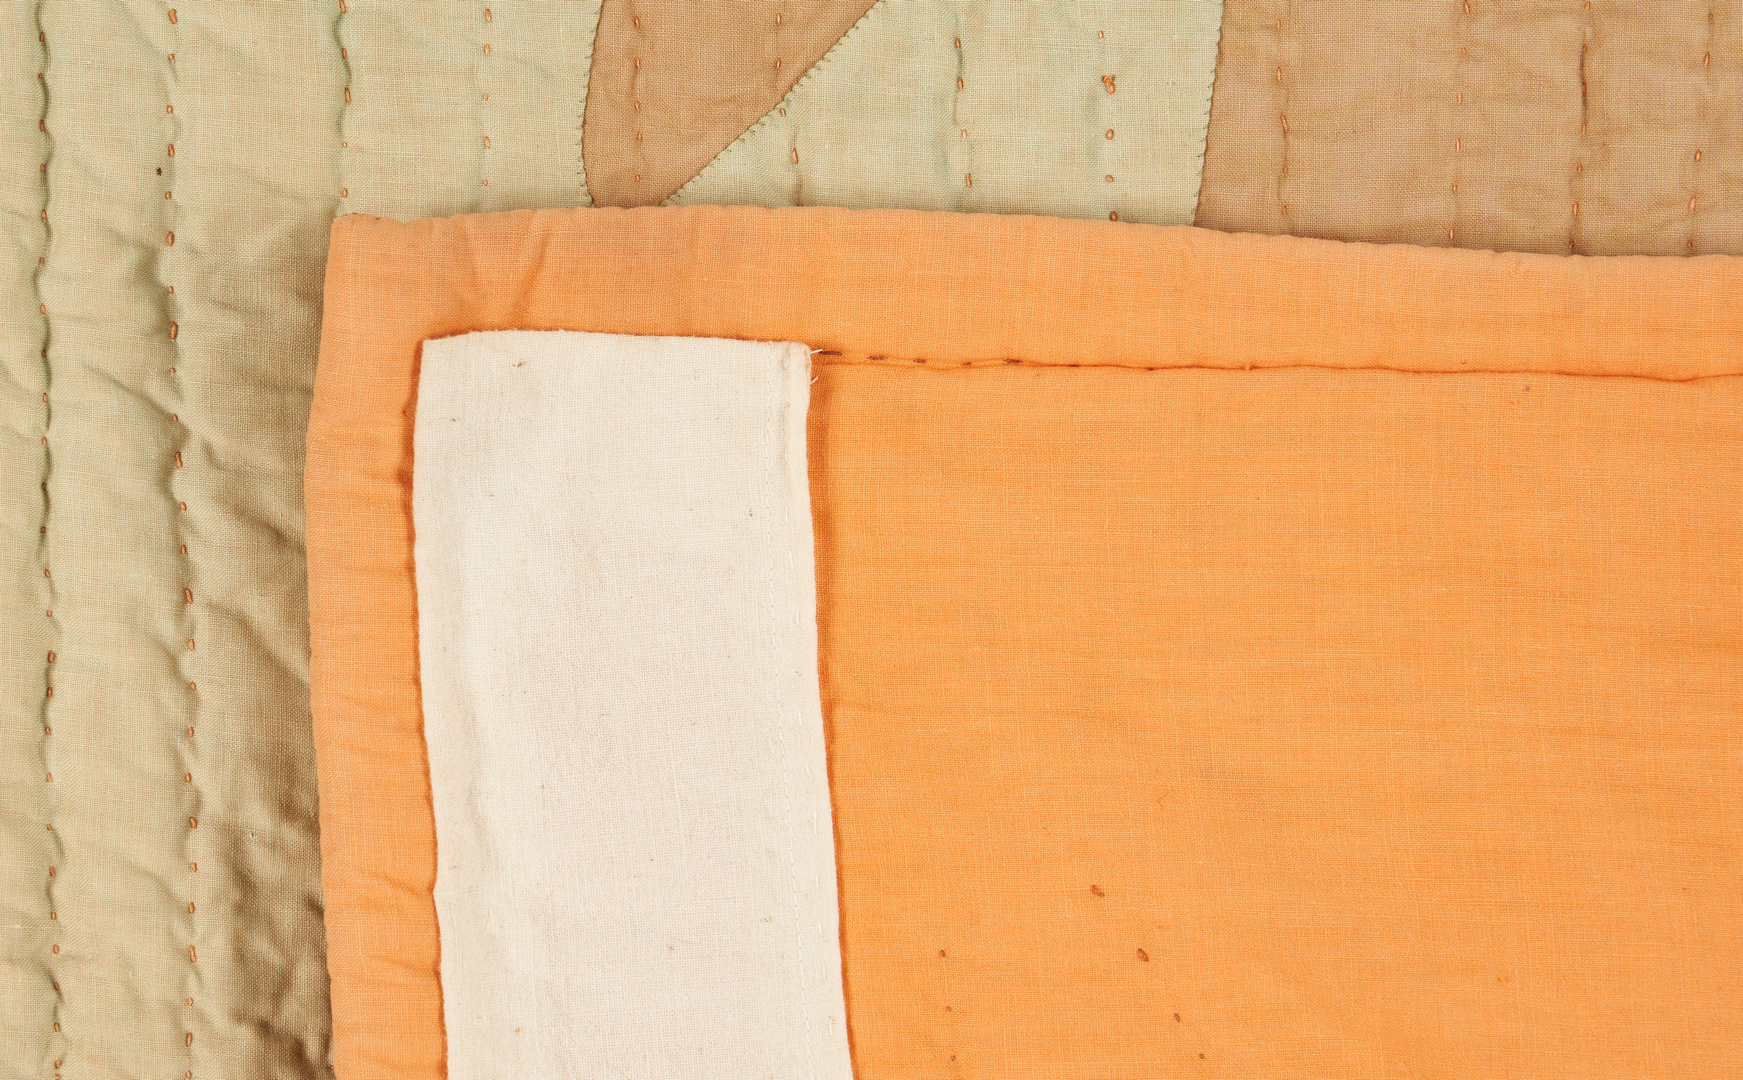 Lot 154: Important "TVA" Quilt, designed by Ruth Clement Bond